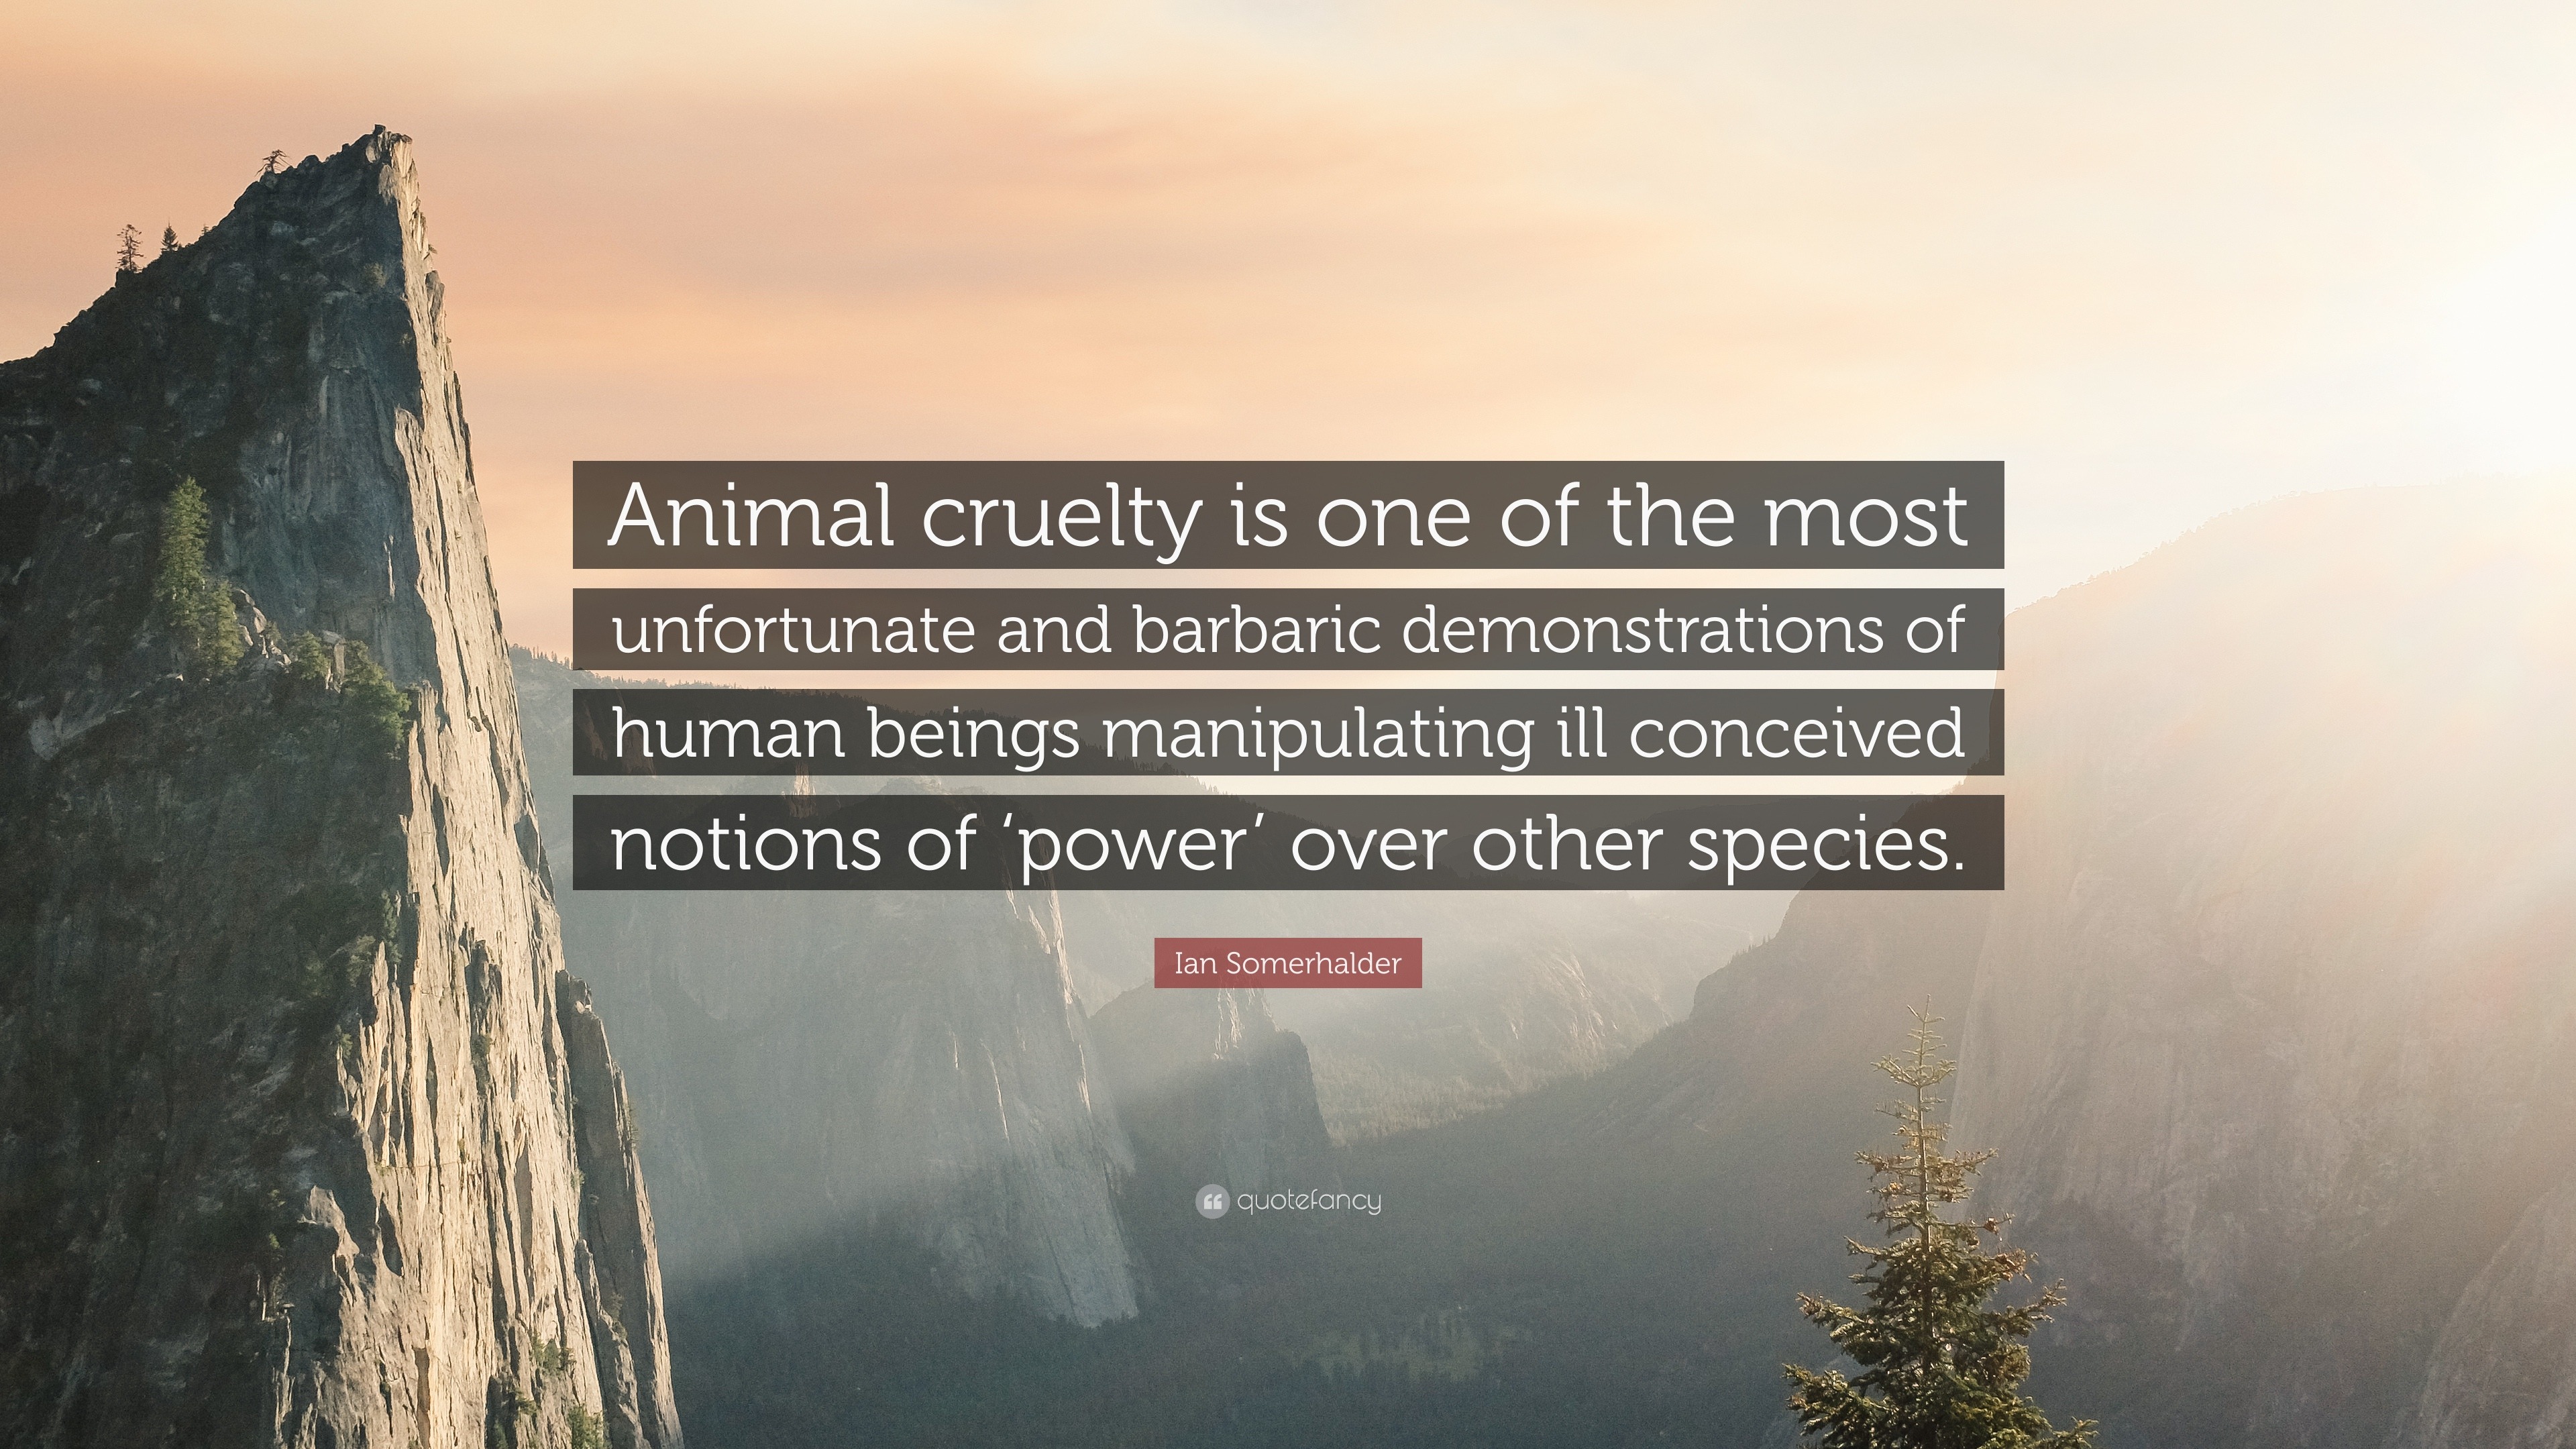 Ian Somerhalder Quote: “Animal cruelty is one of the most unfortunate and  barbaric demonstrations of human beings manipulating ill conceived not...”